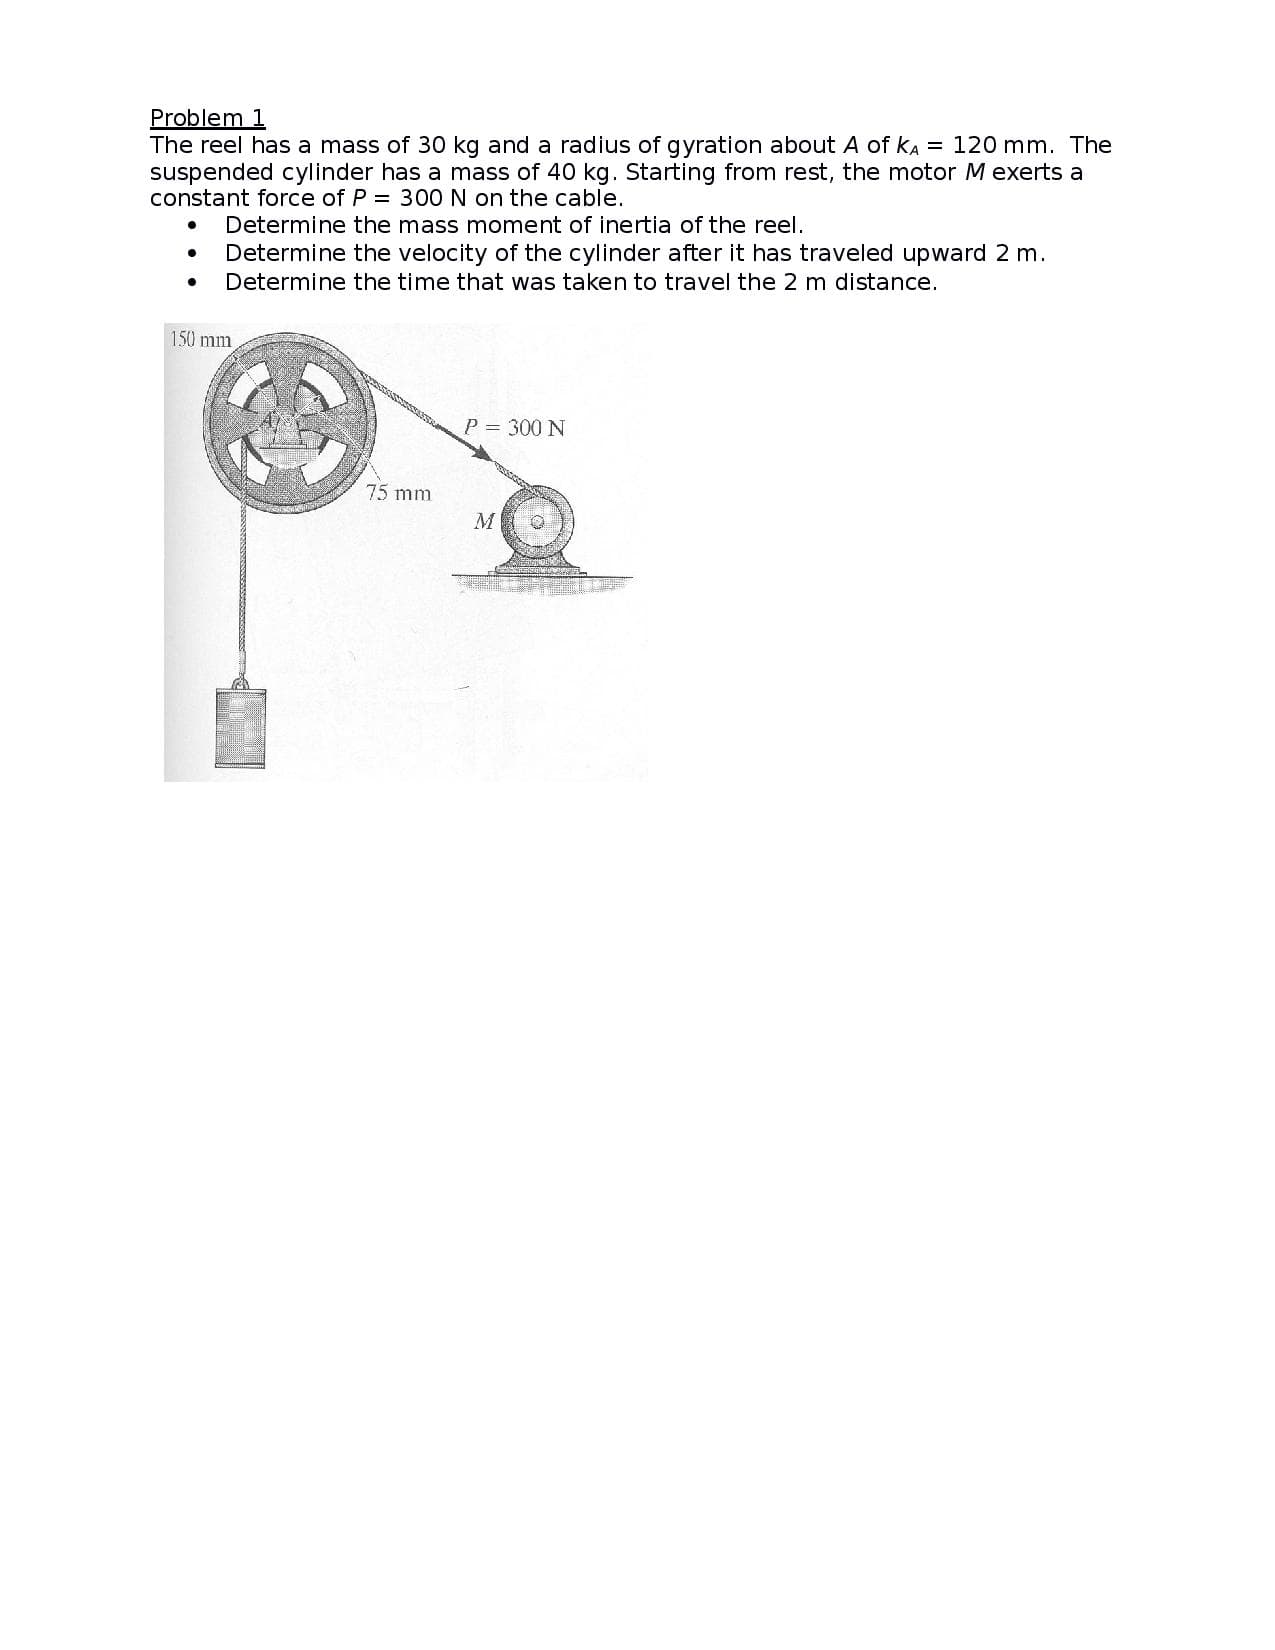 Problem 1
The reel has a mass of 30 kg and a radius of gyration about A of KA = 120 mm. The
suspended cylinder has a mass of 40 kg. Starting from rest, the motor M exerts a
constant force of P = 300 N on the cable.
Determine the mass moment of inertia of the reel.
Determine the velocity of the cylinder after it has traveled upward 2 m.
Determine the time that was taken to travel the 2 m distance.
150 mm
P = 300 N
75 mm
